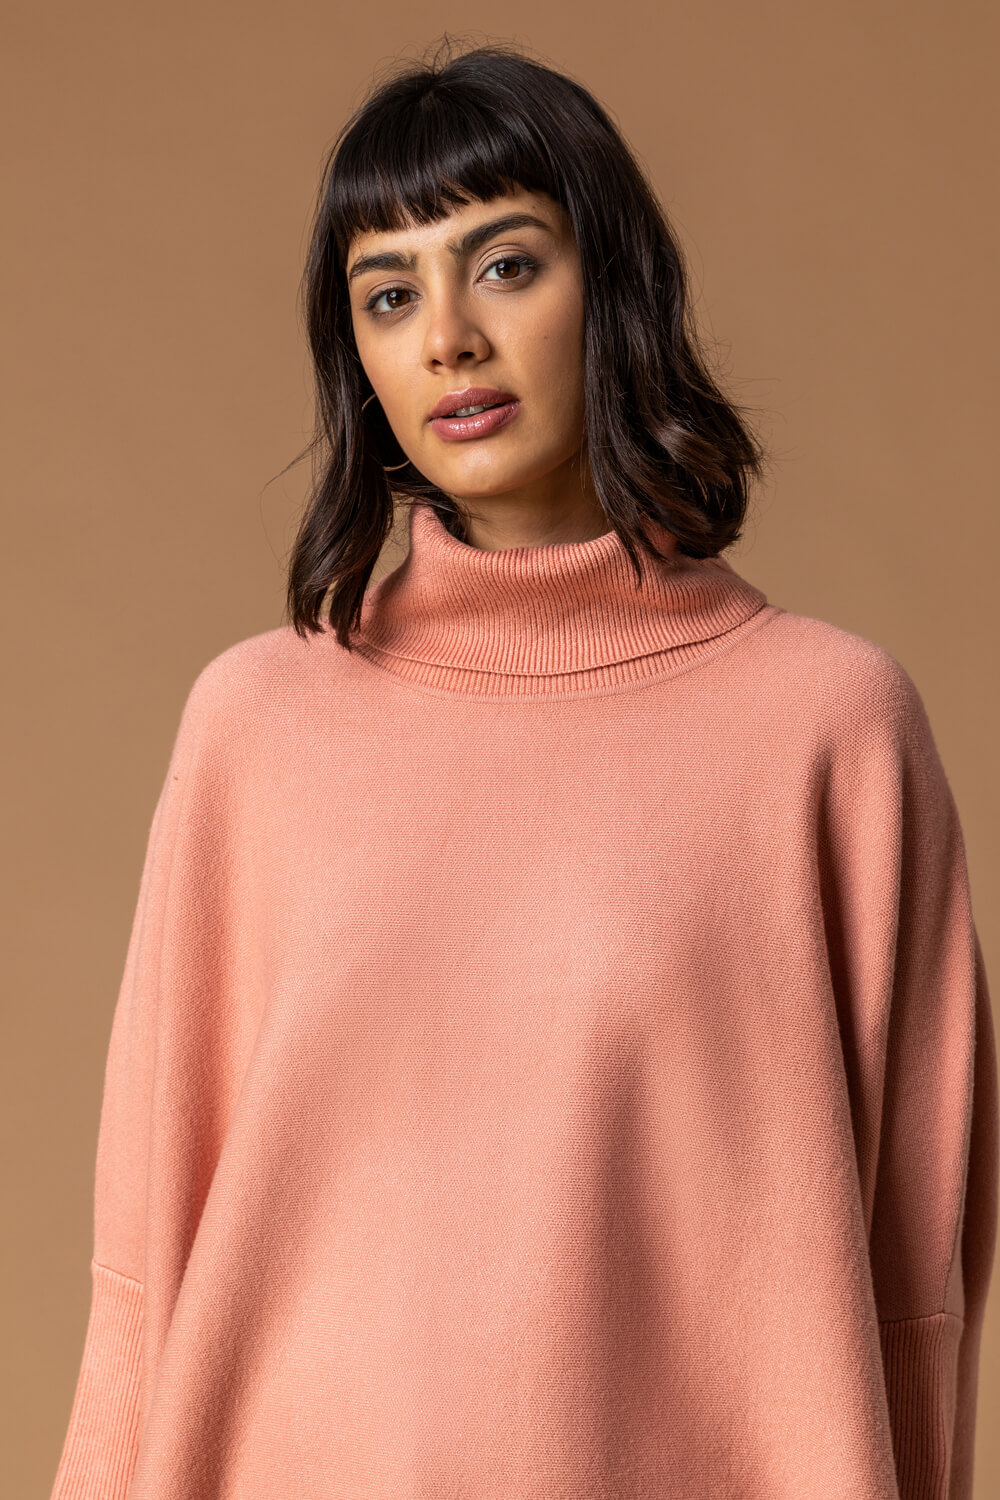 PINK Longline Roll Neck Poncho Jumper, Image 4 of 4